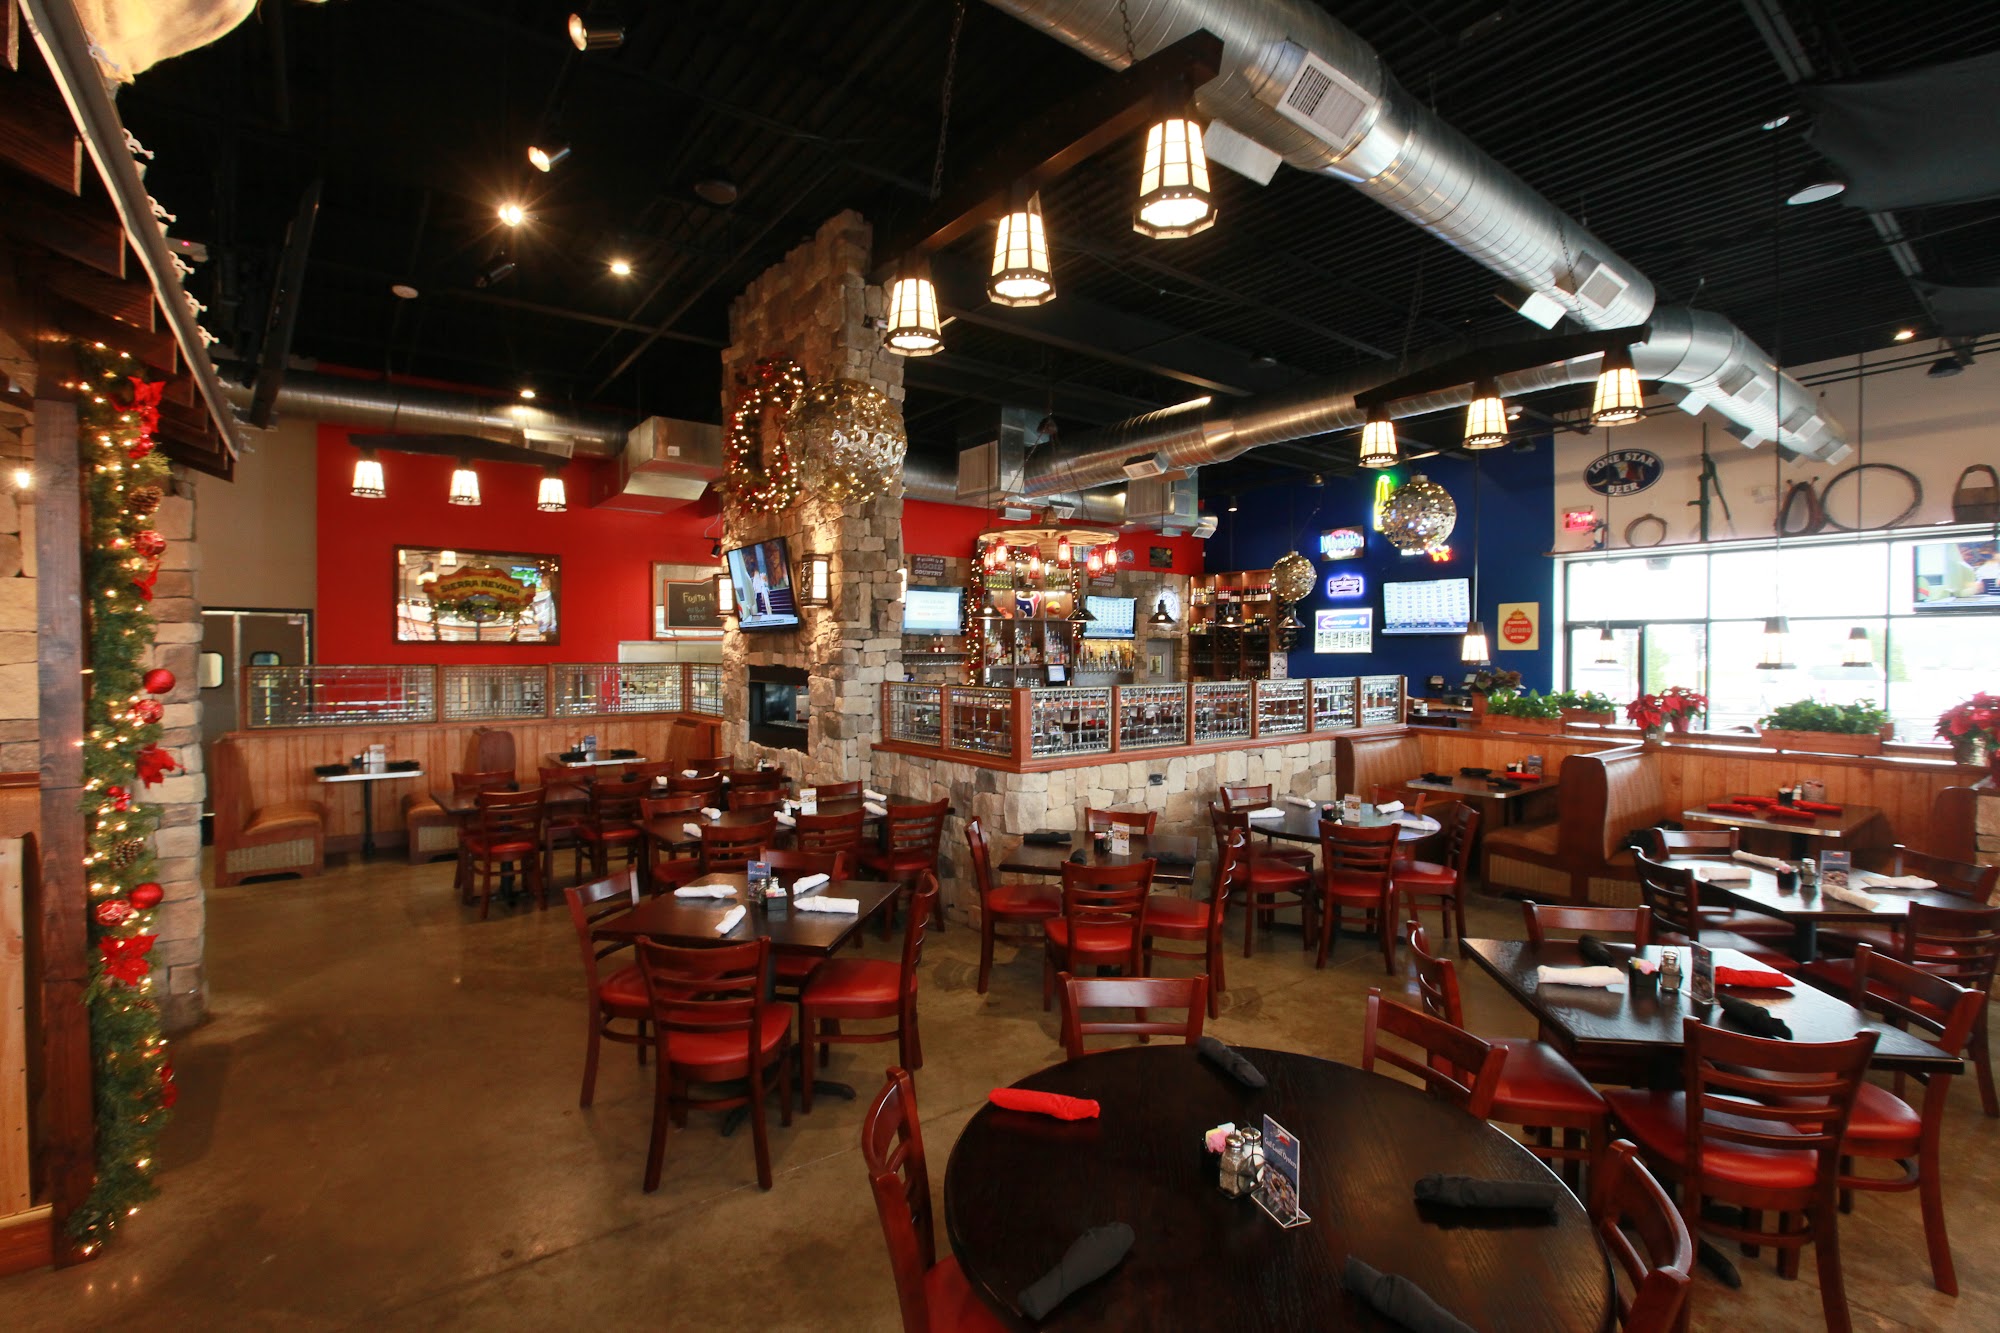 Texas Mesquite Grill